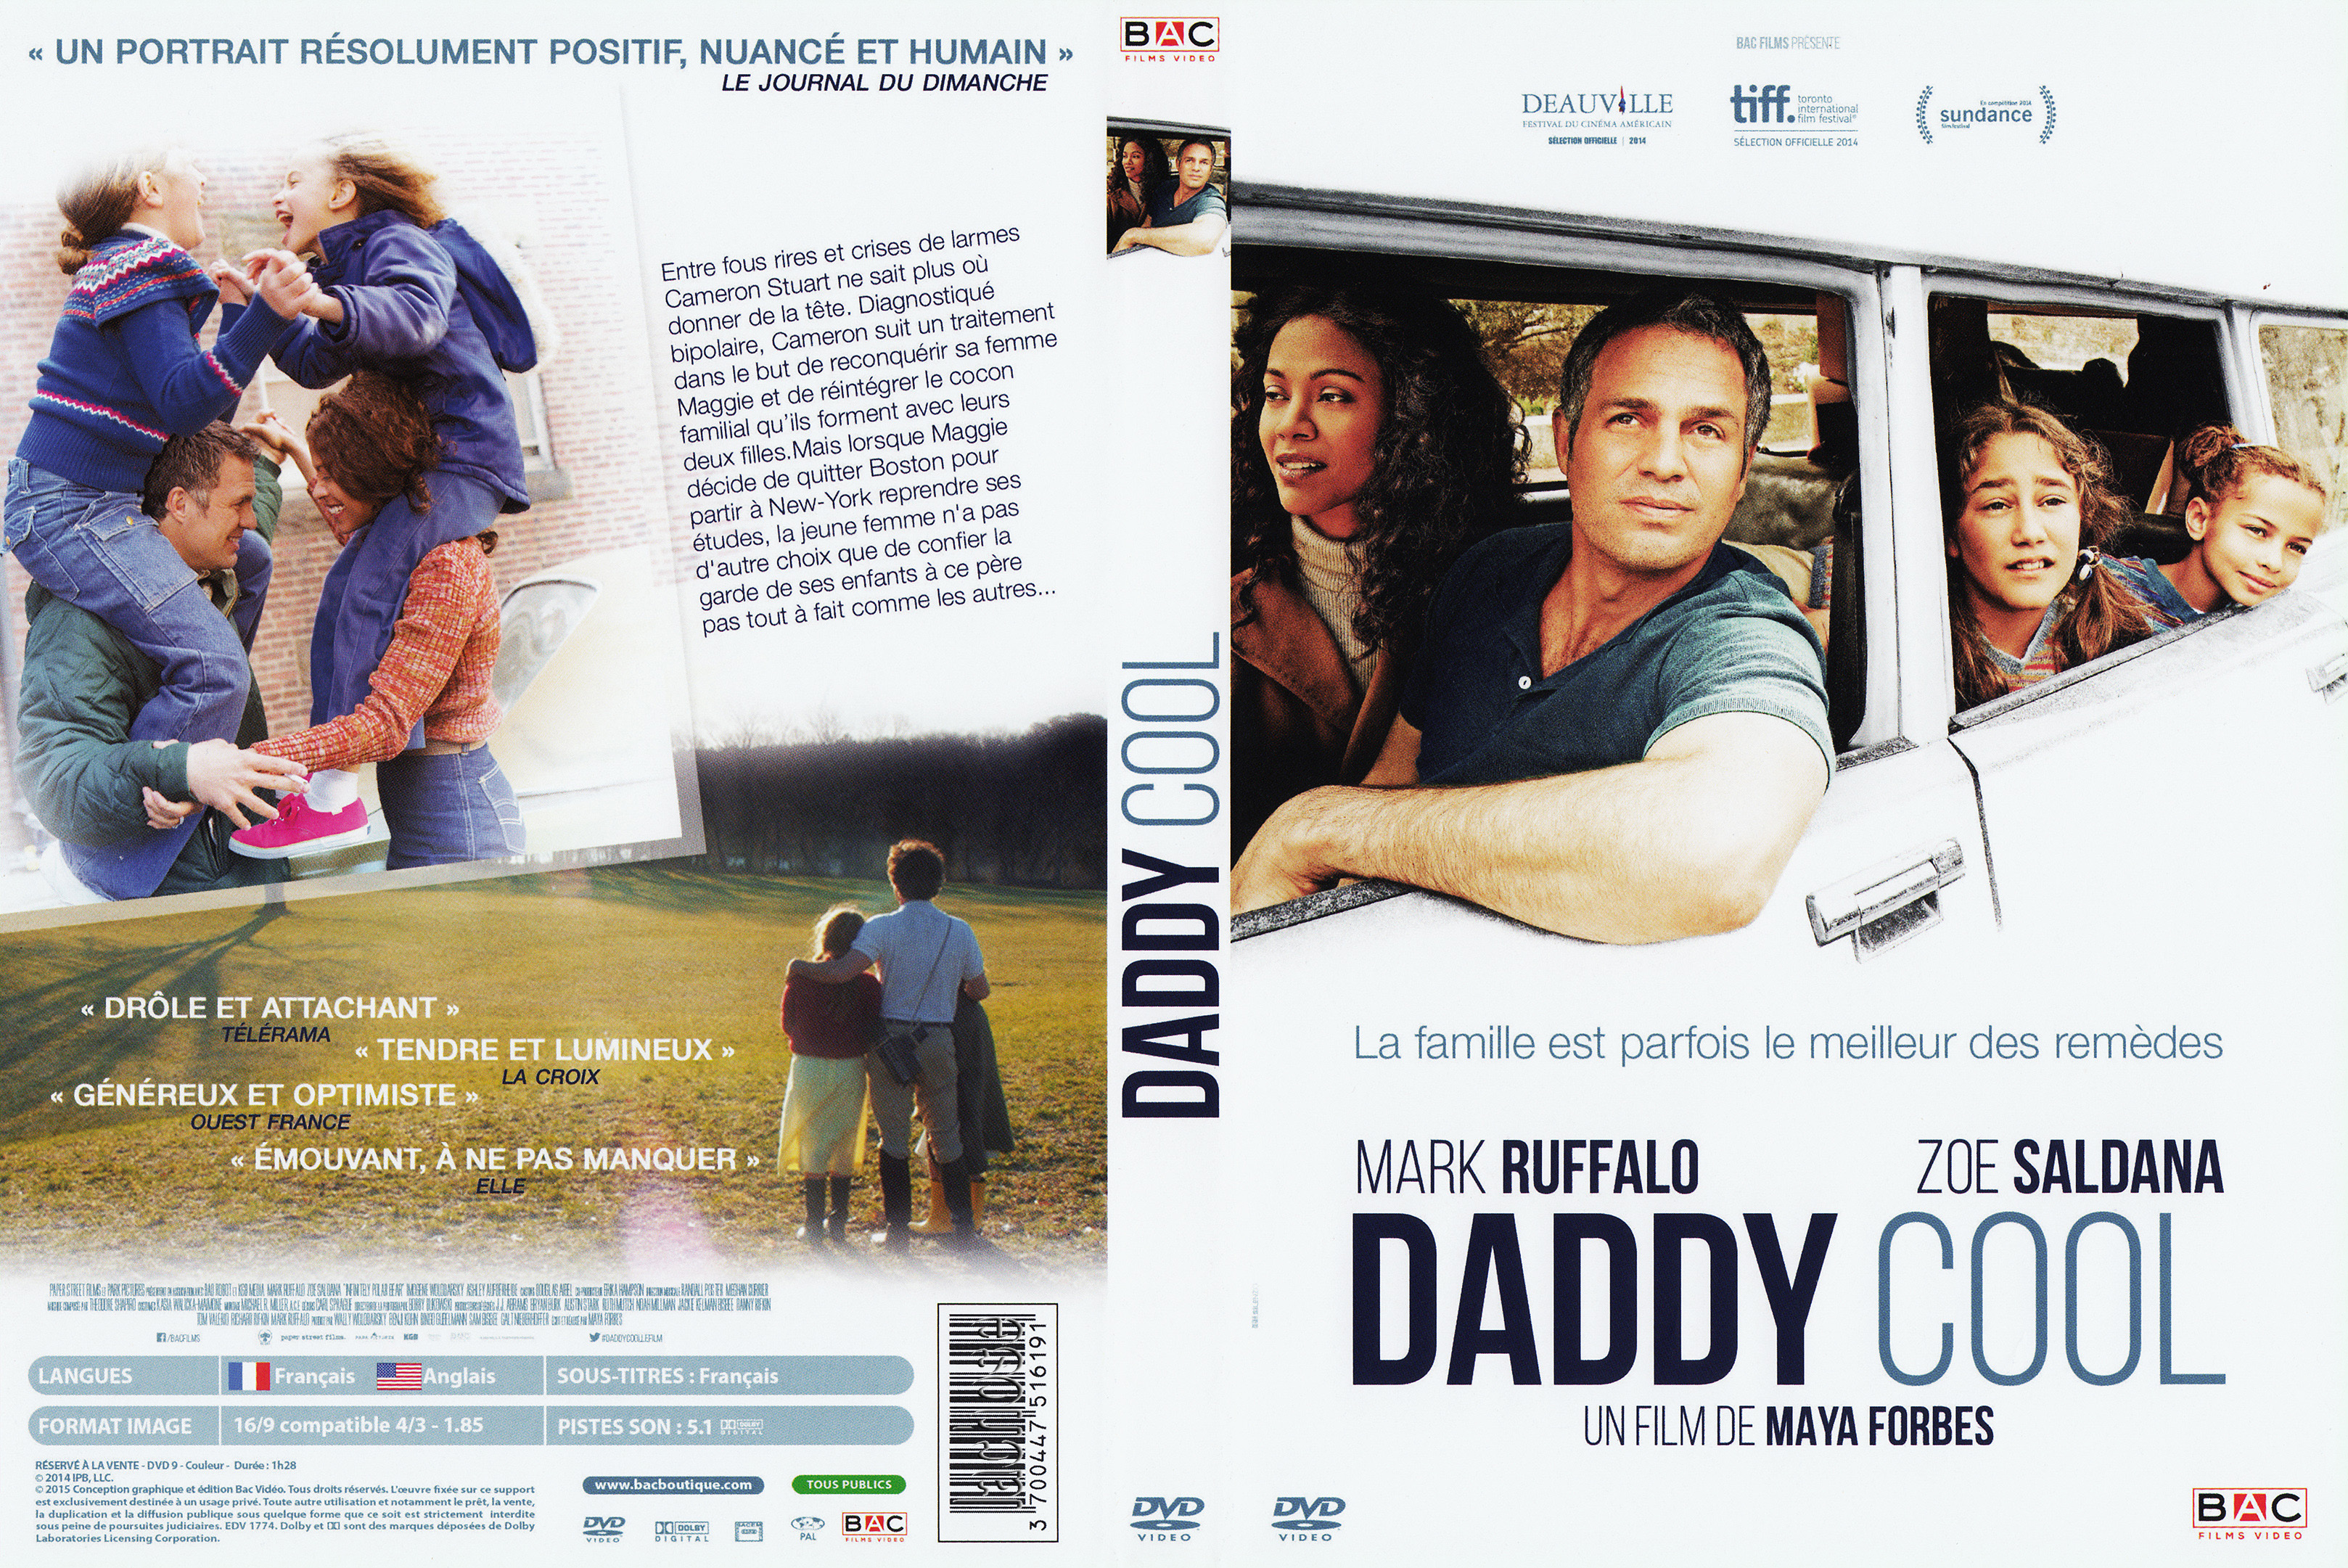 Jaquette DVD Daddy cool